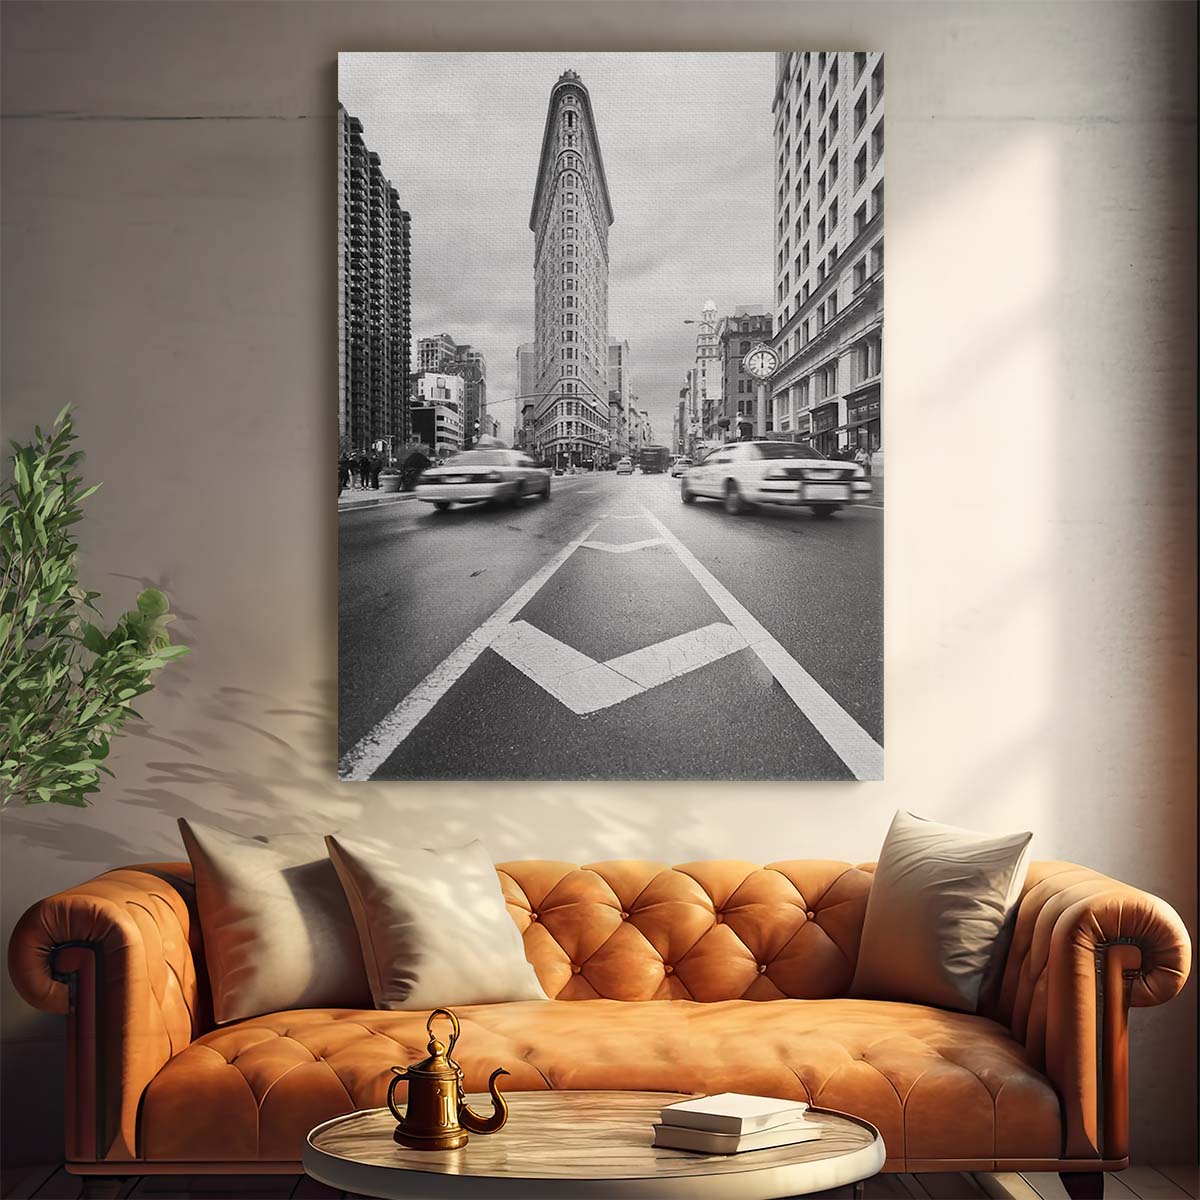 Flatiron Building NYC Taxi Street Photography - Monochrome Urban Metropolis by Luxuriance Designs, made in USA